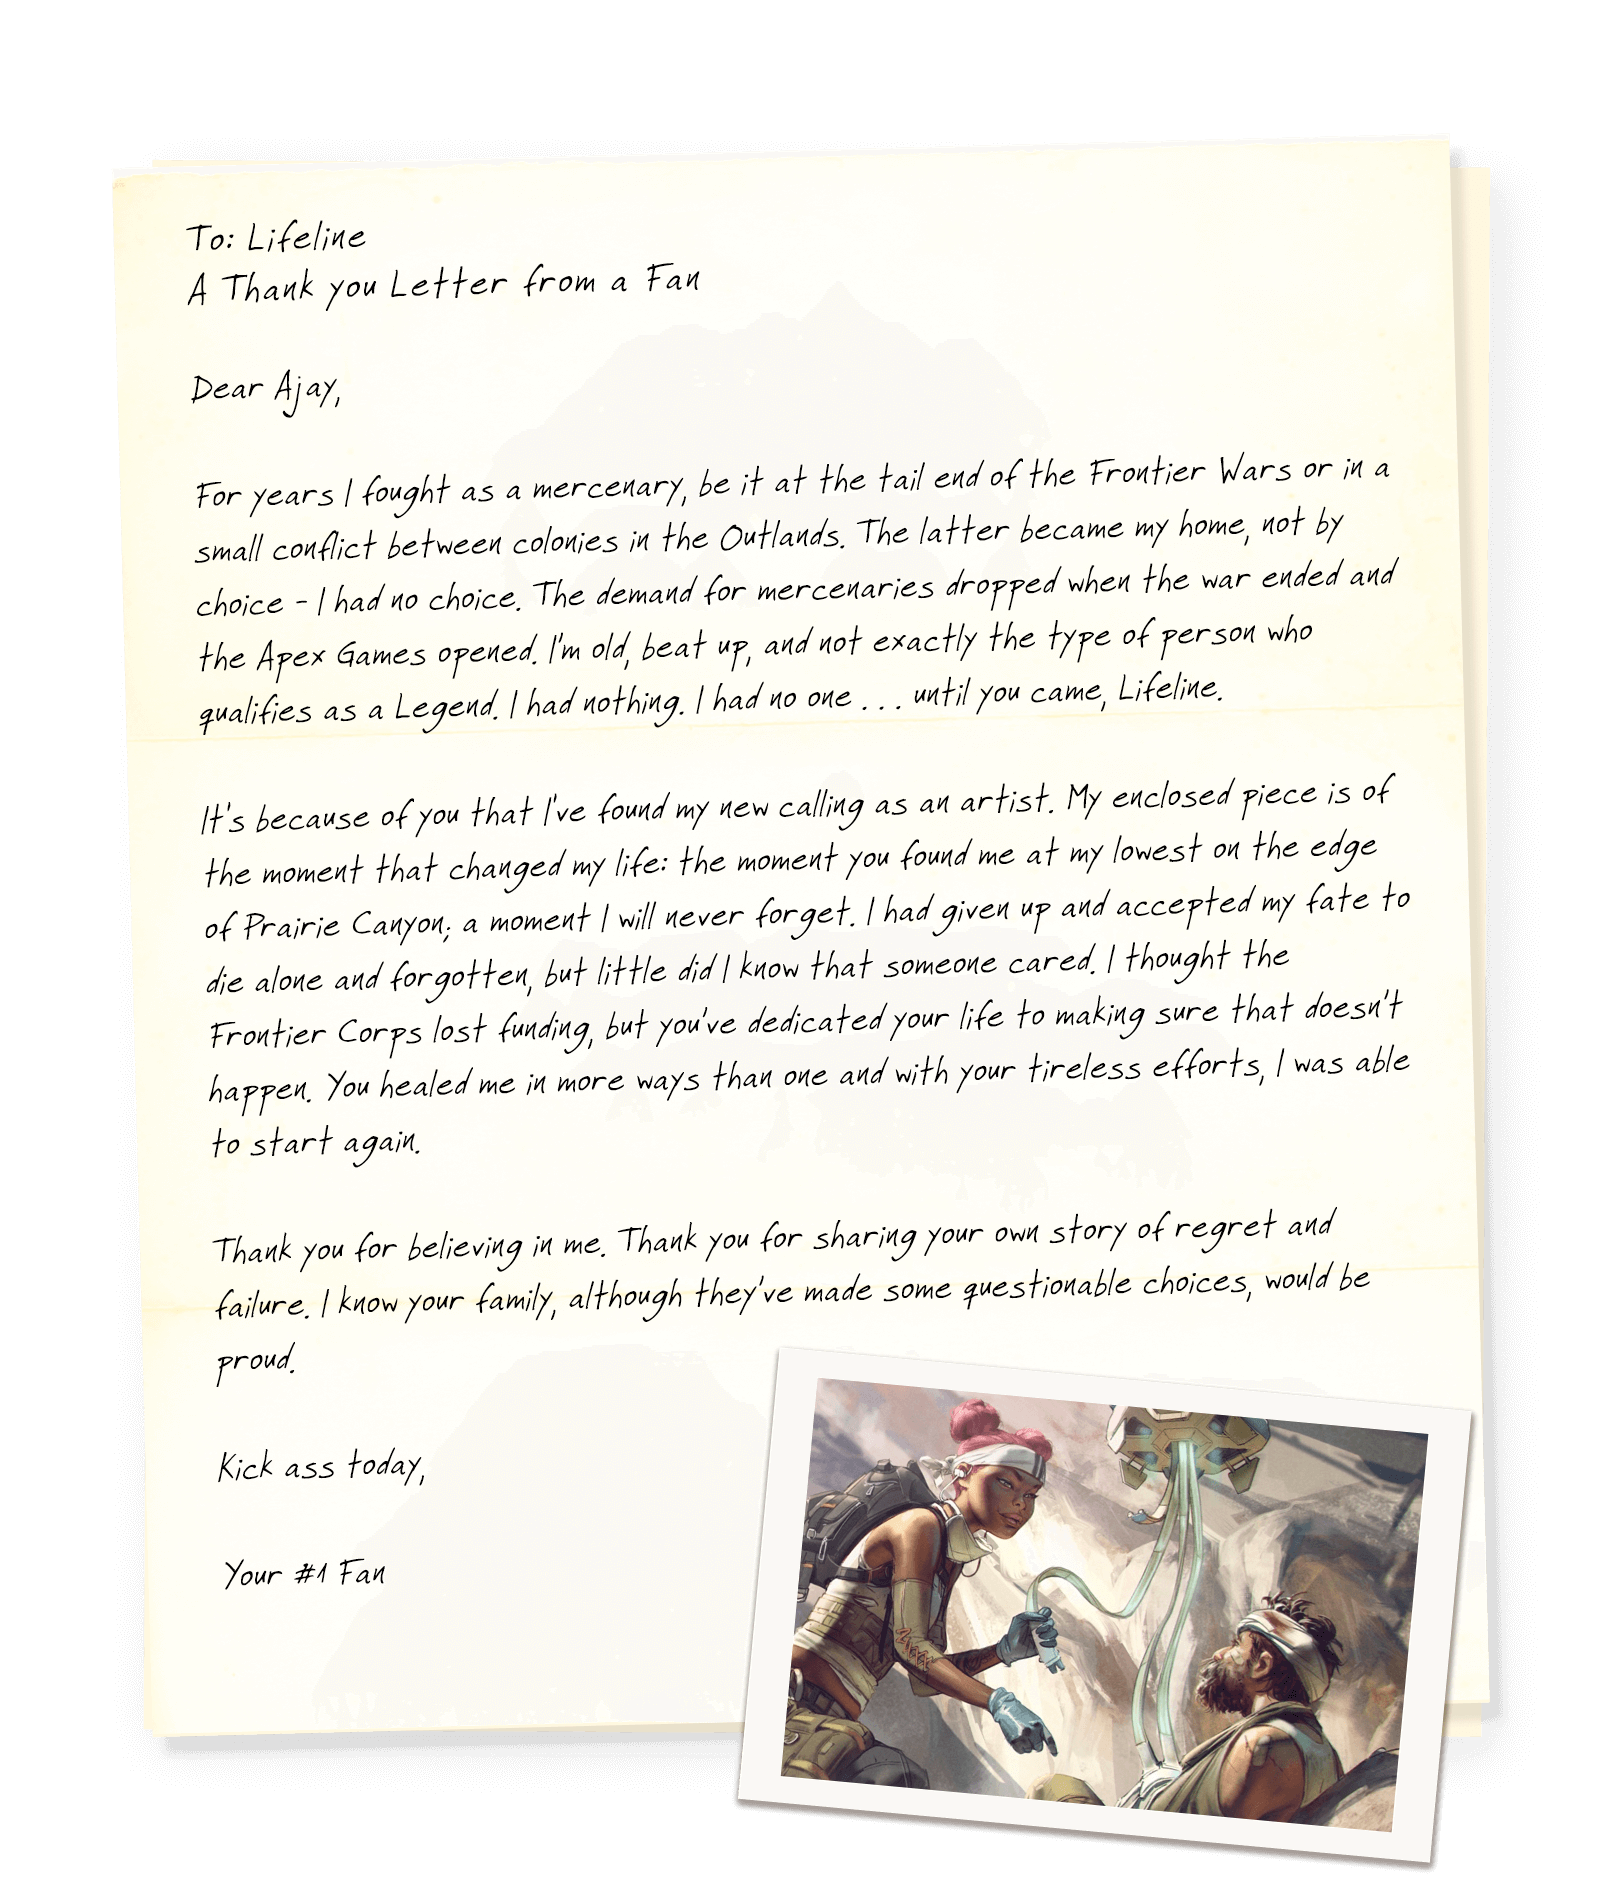 LIFELINE
A Thank You Letter from a Fan

Dear Ajay,

For years I fought as a mercenary, be it at the tail end of the Frontier Wars or in a small conflict between colonies in the Outlands. The latter became my home, not by choice - I had no choice. The demand for mercenaries dropped when the war ended and the Apex Games opened. I’m old, beat up, and not exactly the type of person who qualifies as a Legend. I had nothing. I had no one . . . until you came, Lifeline.

It's because of you that I've found my new calling as an artist. My enclosed piece is of the moment that changed my life: the moment you found me at my lowest on the edge of Prairie Canyon; a moment I will never forget. I had given up and accepted my fate to die alone and forgotten, but little did I know that someone cared. I thought the Frontier Corps lost funding, but you’ve dedicated your life to making sure that doesn’t happen. You healed me in more ways than one and with your tireless efforts, I was able to start again.

Thank you for believing in me. Thank you for sharing your own story of regret and failure. I know your family, although they’ve made some questionable choices, would be proud.

Kick ass today,

Your #1 Fan
